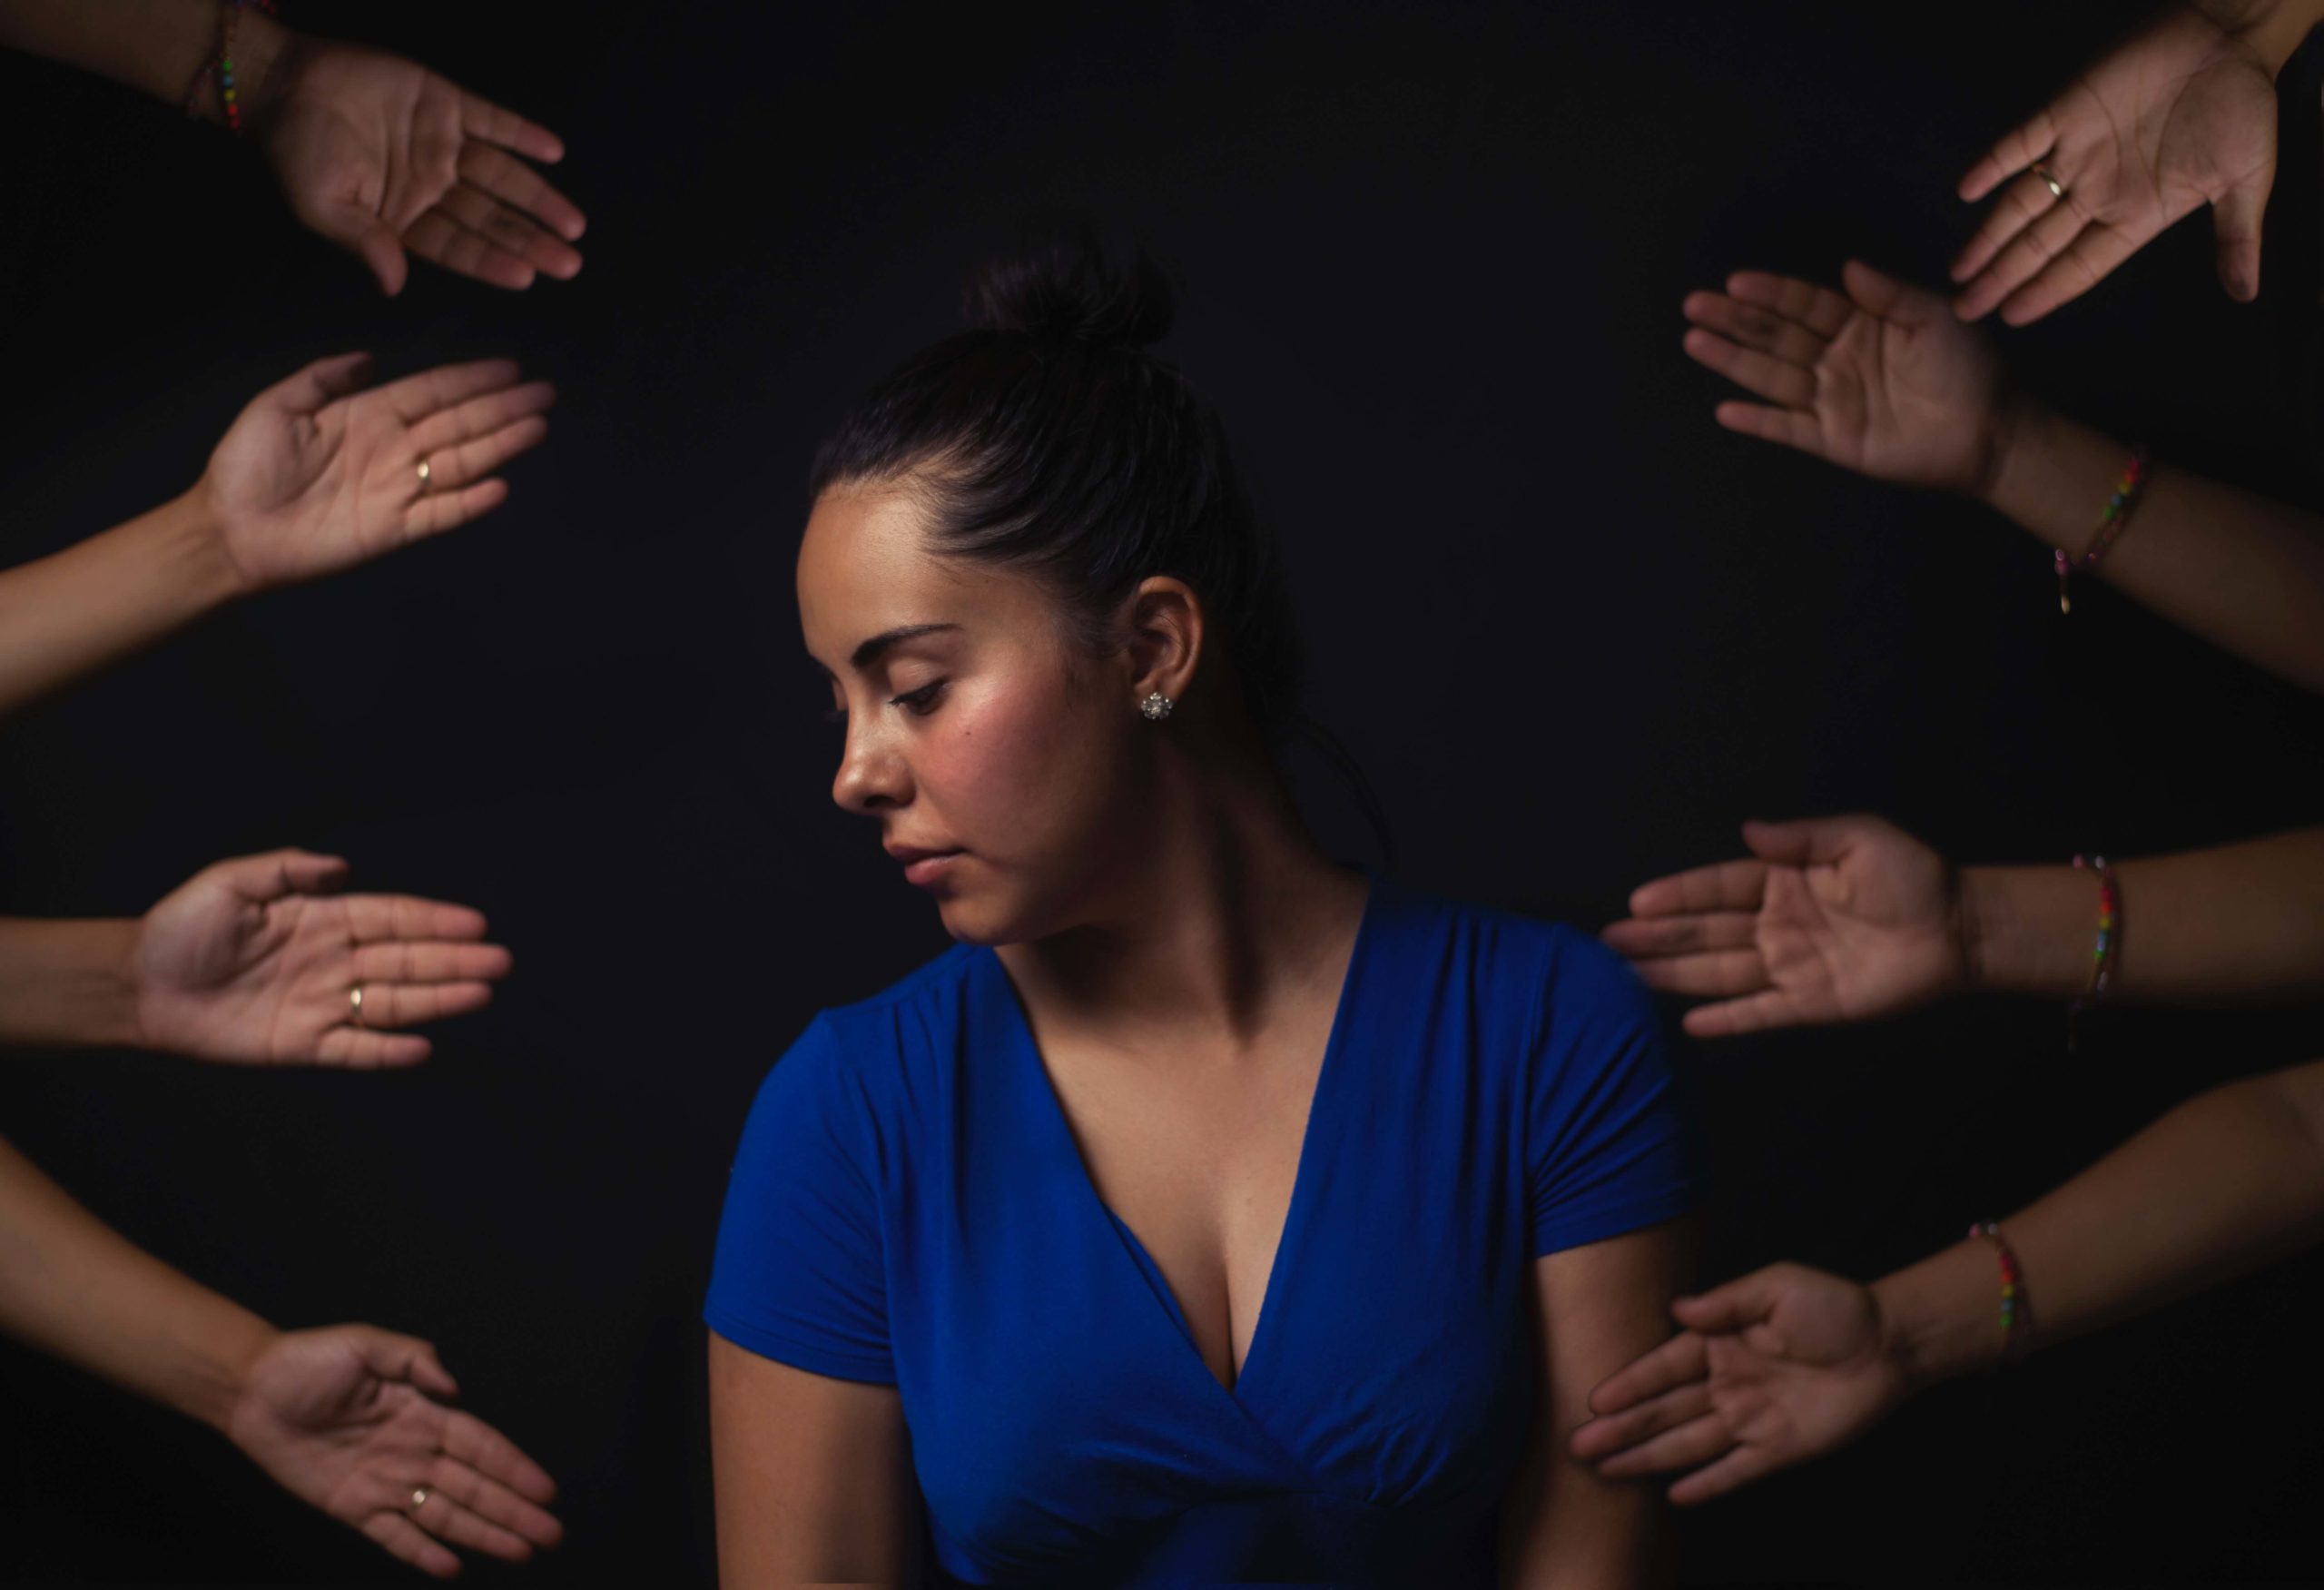 Image of a young woman surrounded by hands